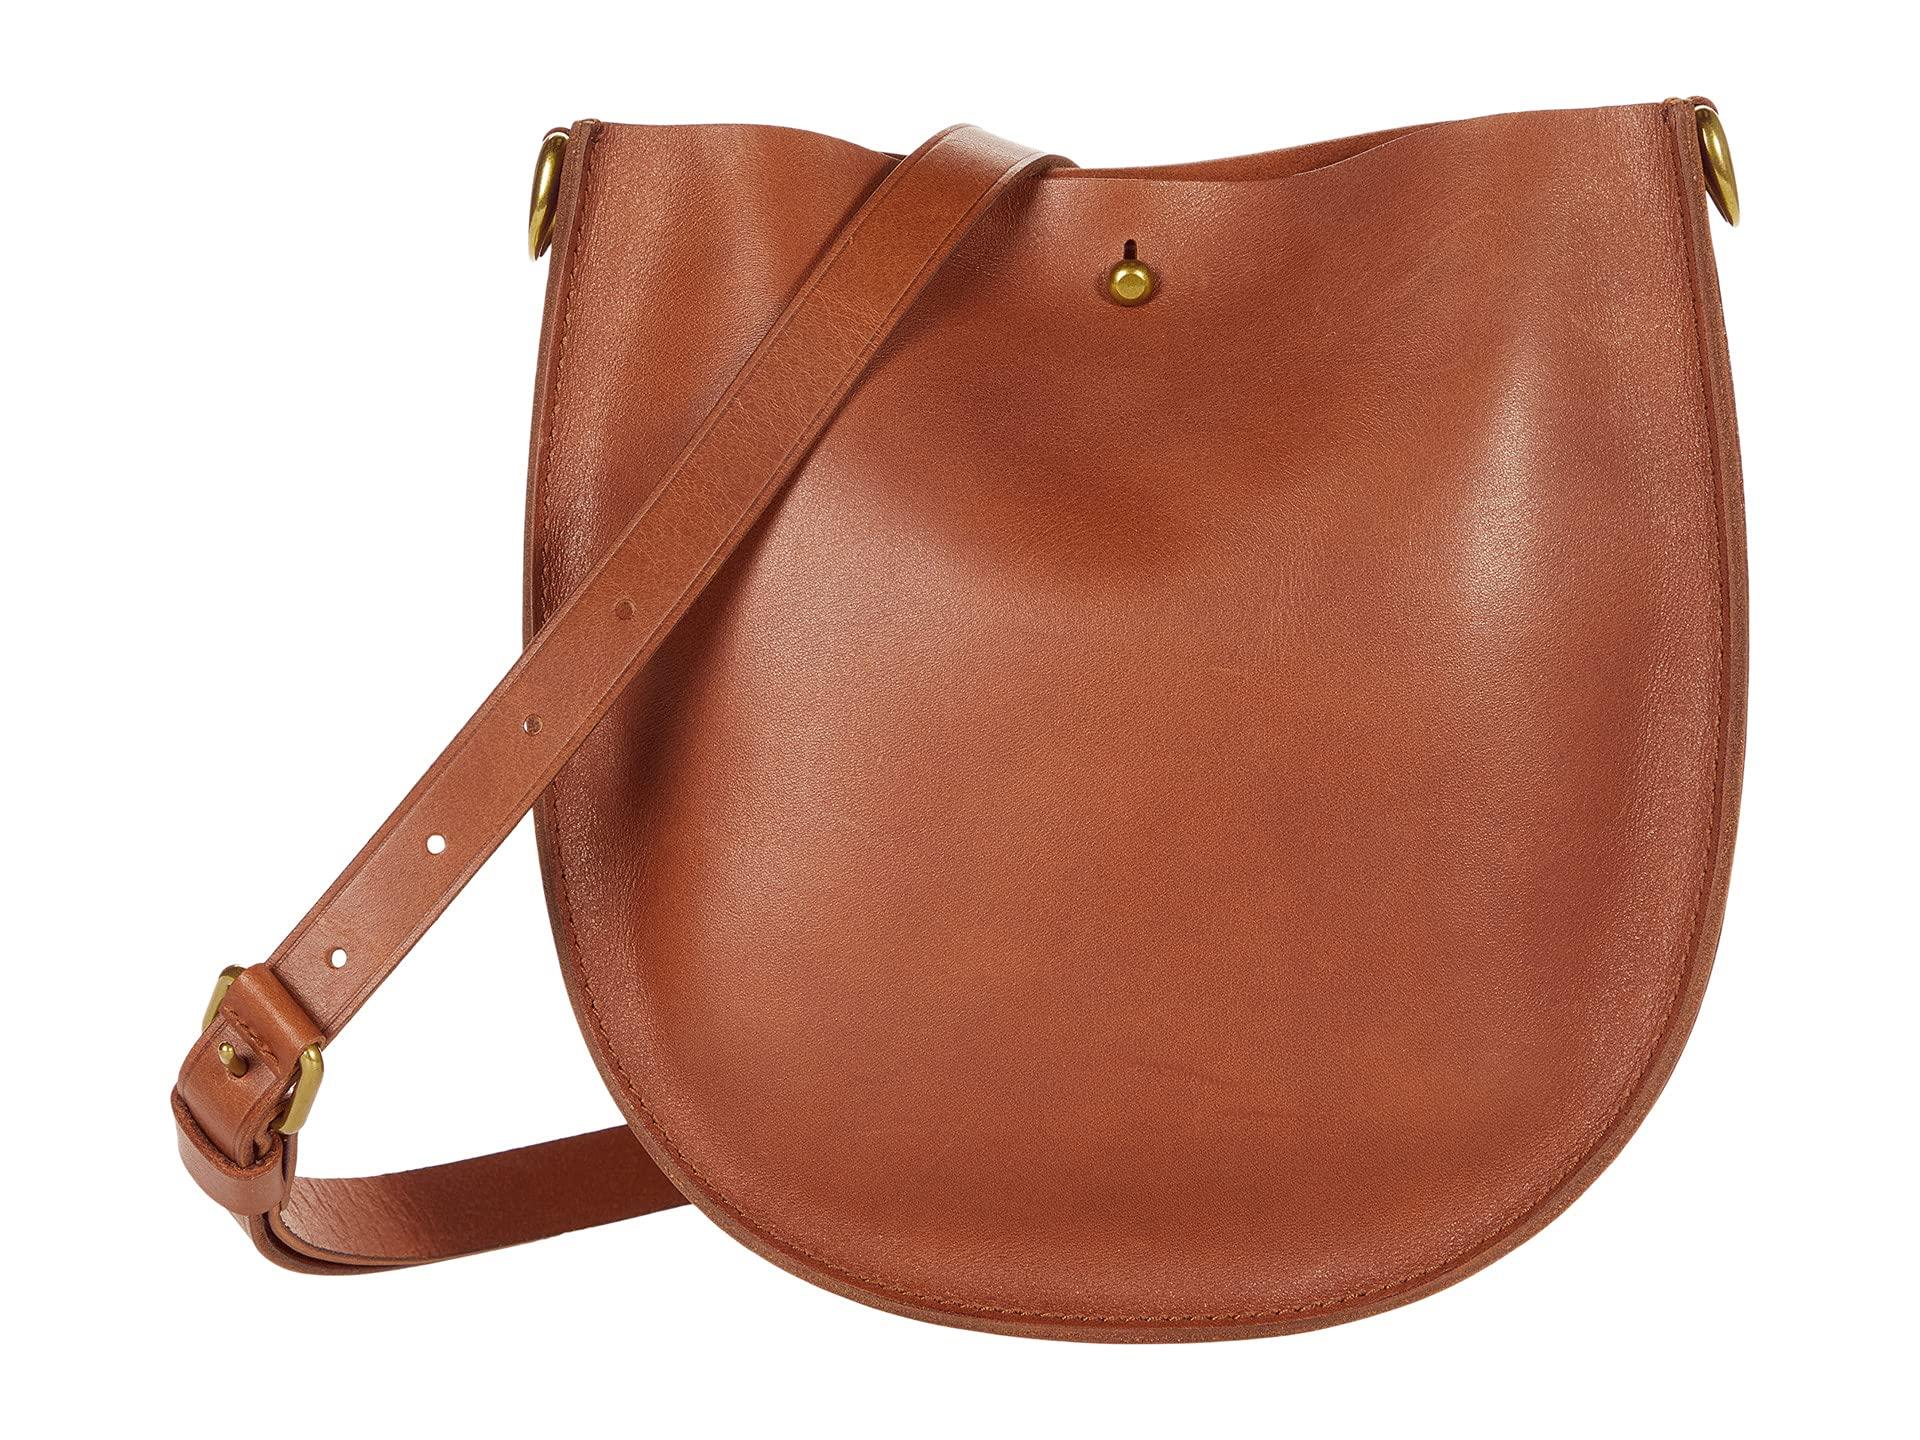 Madewell The Small Transport Saddlebag in Brown